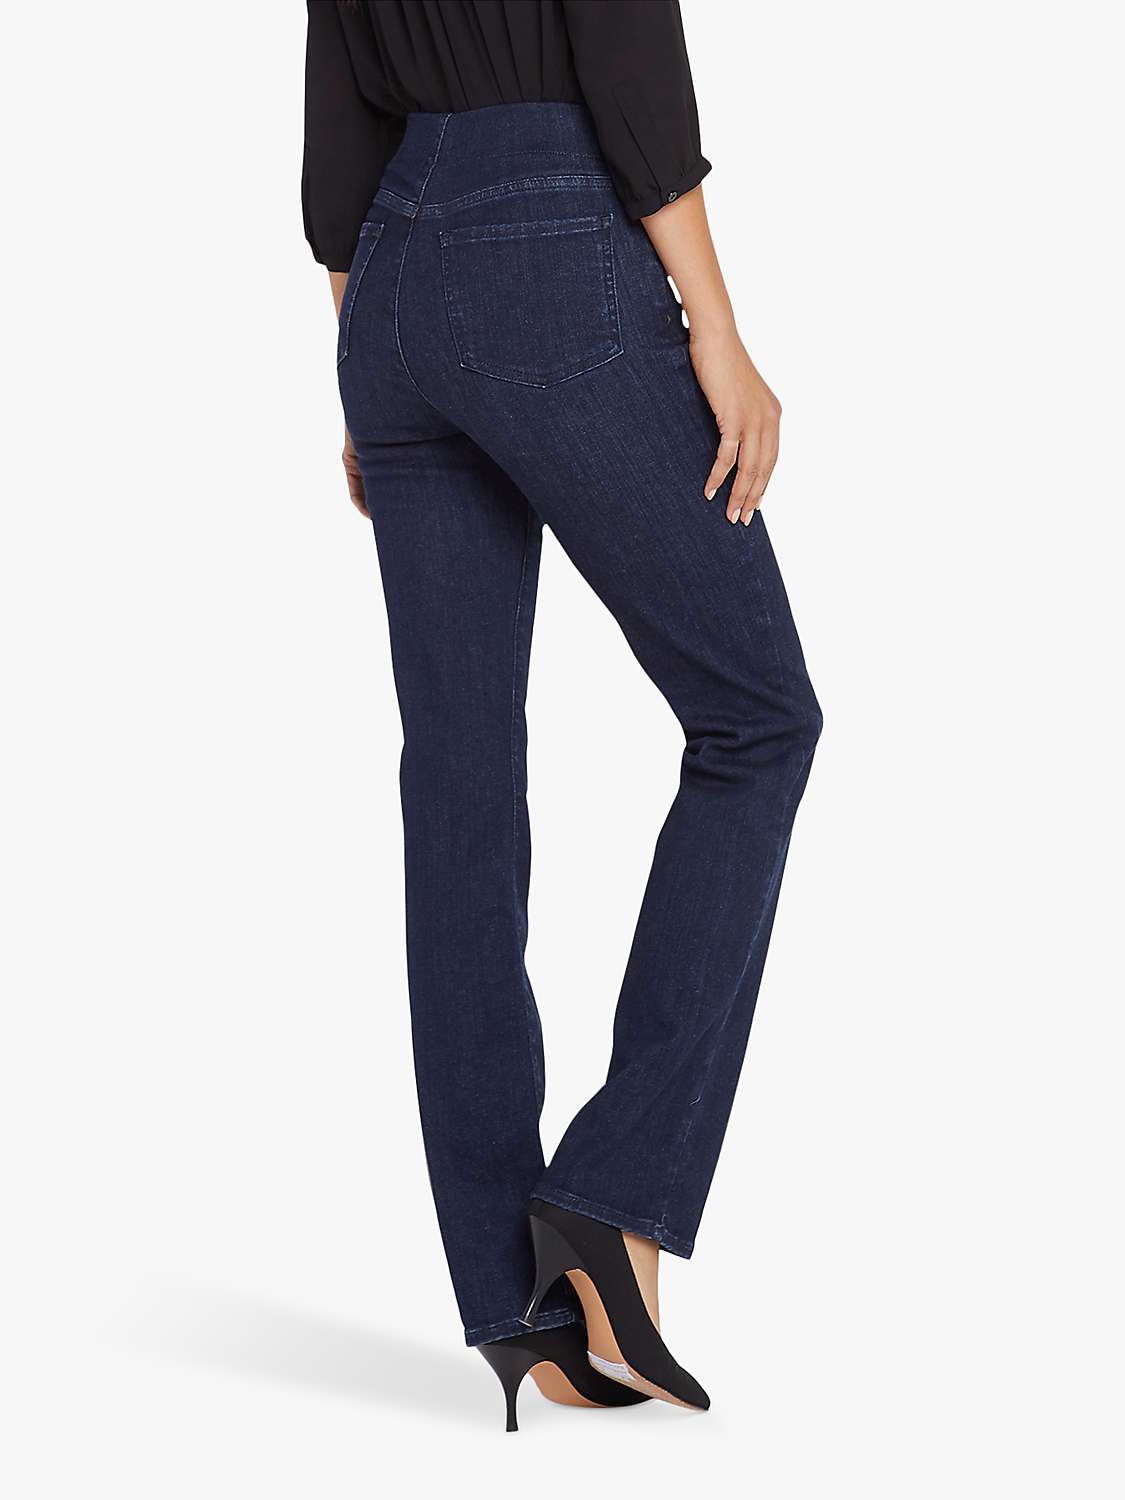 Buy NYDJ Marilyn Straight Pull-On Jeans in SpanSpring™ Denim, Langley Online at johnlewis.com